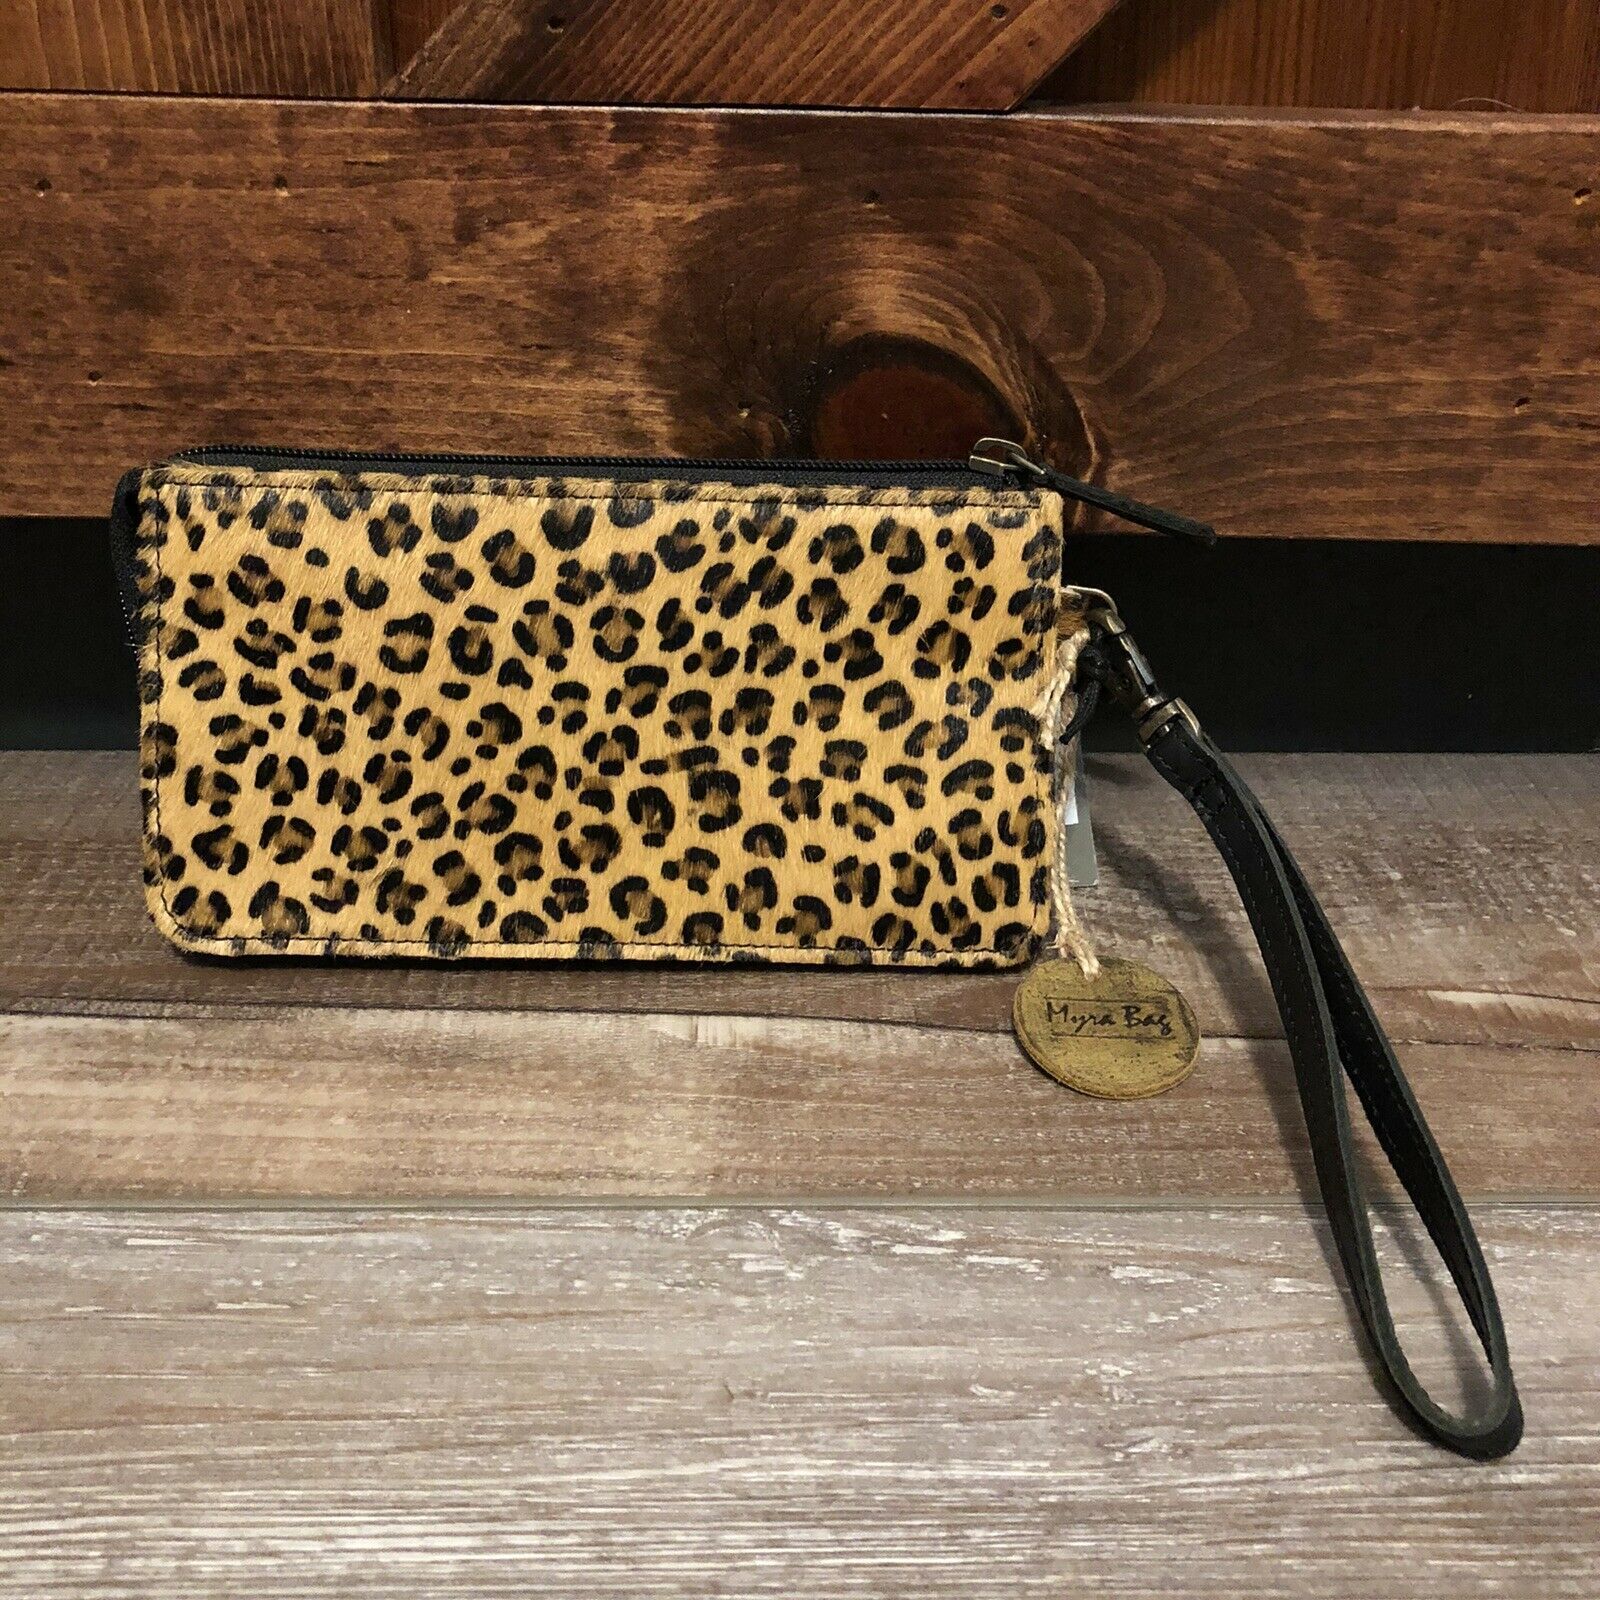 Myra Bag Uptown Girl Leopard Hairon Wallet and similar items